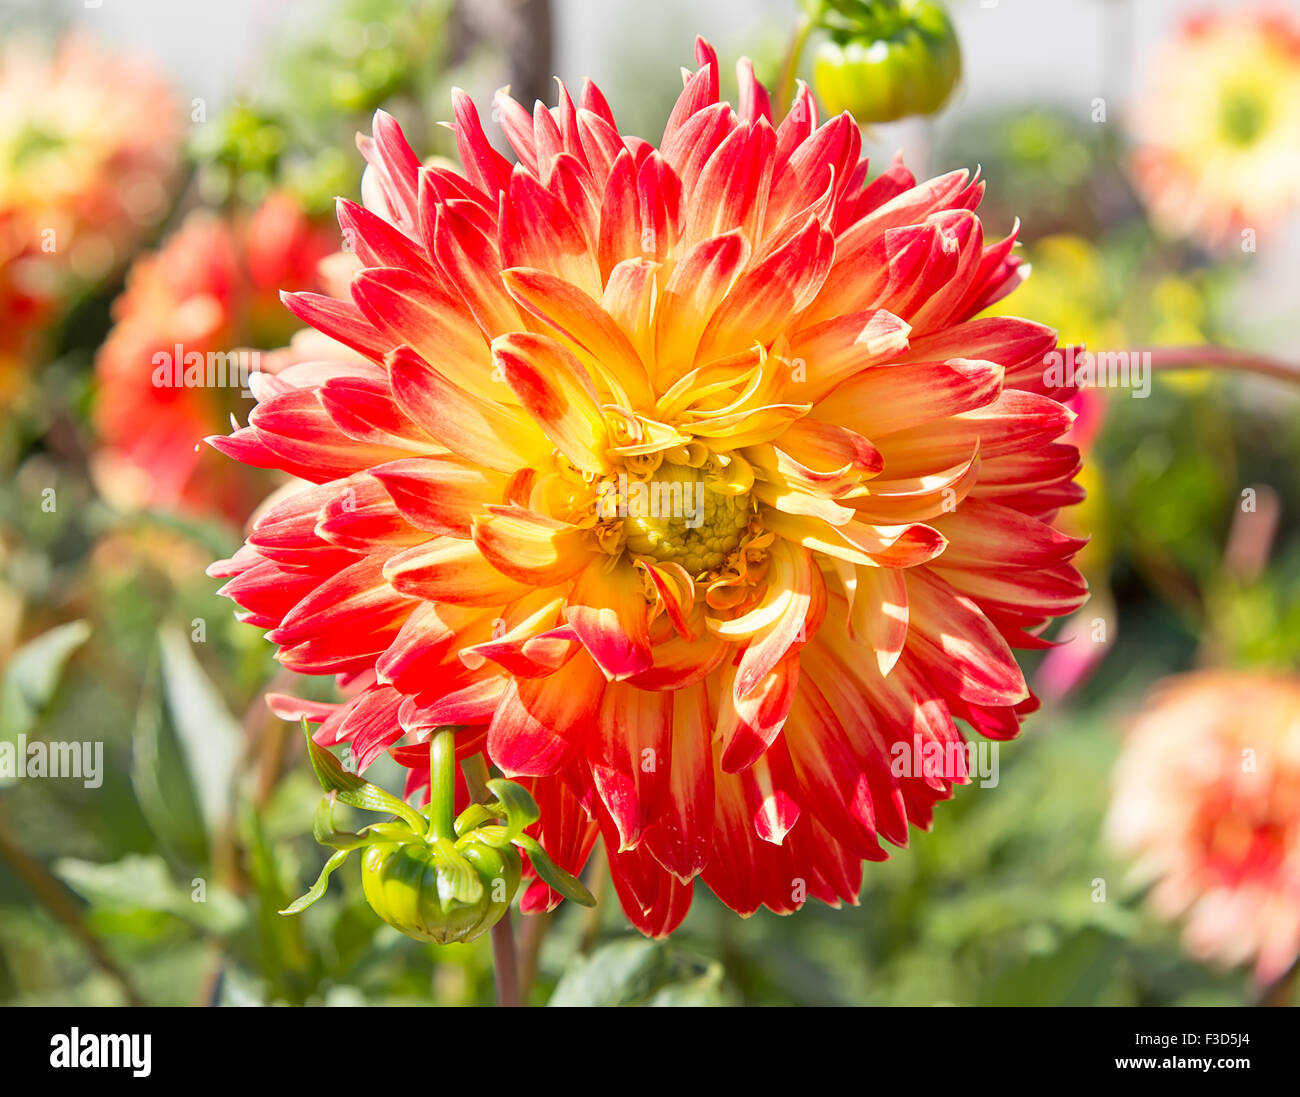 Colorful dahlia flower with morning dew drops Stock Photo